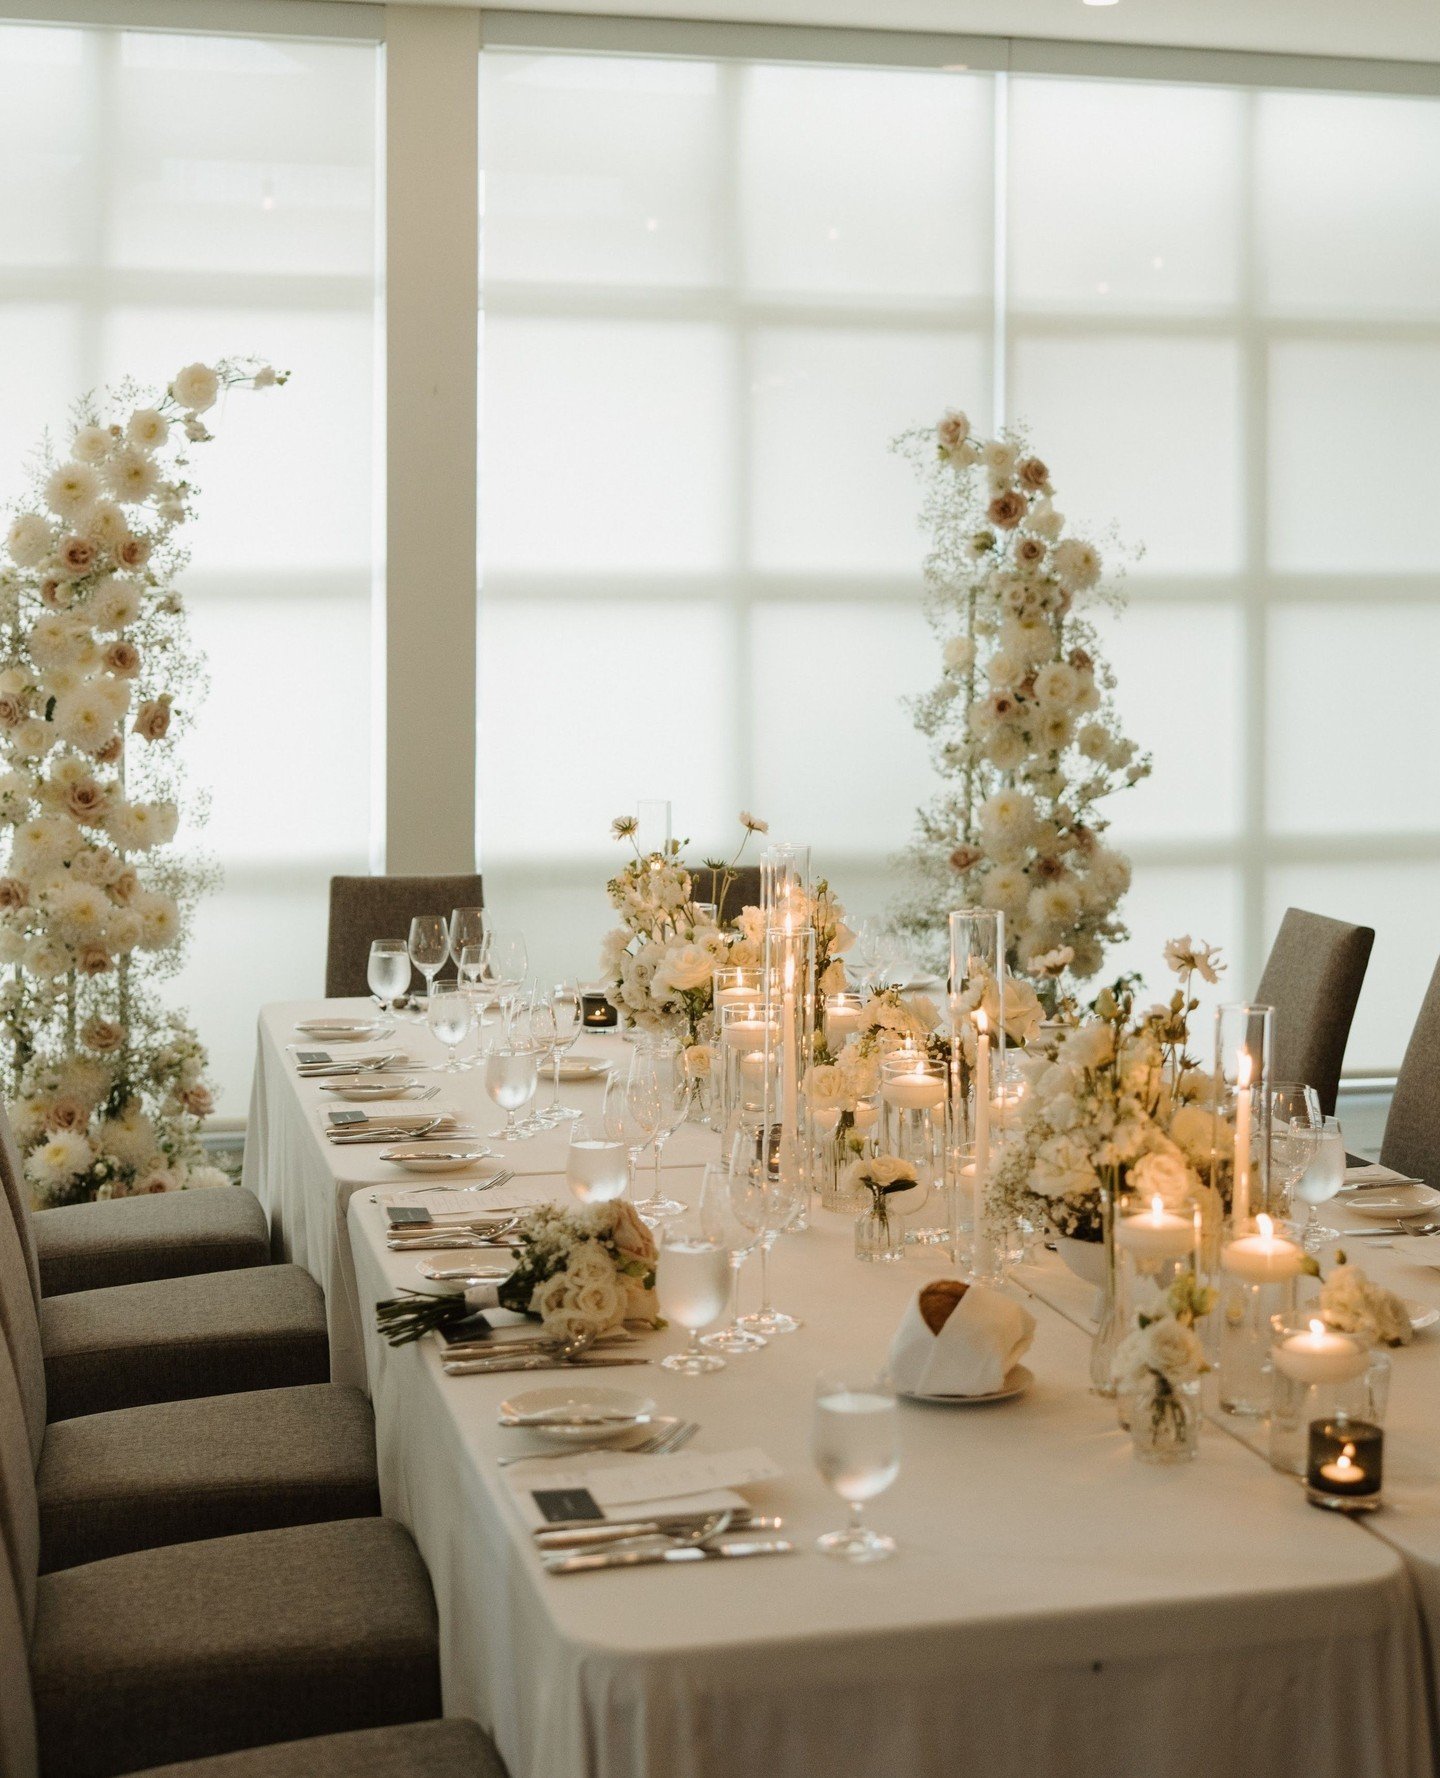 We absolutely swoon when a client tells us they want lots of candles in their centrepiece designs, and how could we not when their weddings end up looking this beautiful? ⁠
⁠
- - -⁠
⁠
Floral &amp; Design @freshlookdesigninc⁠
Venue @langdonhall⁠
Photo